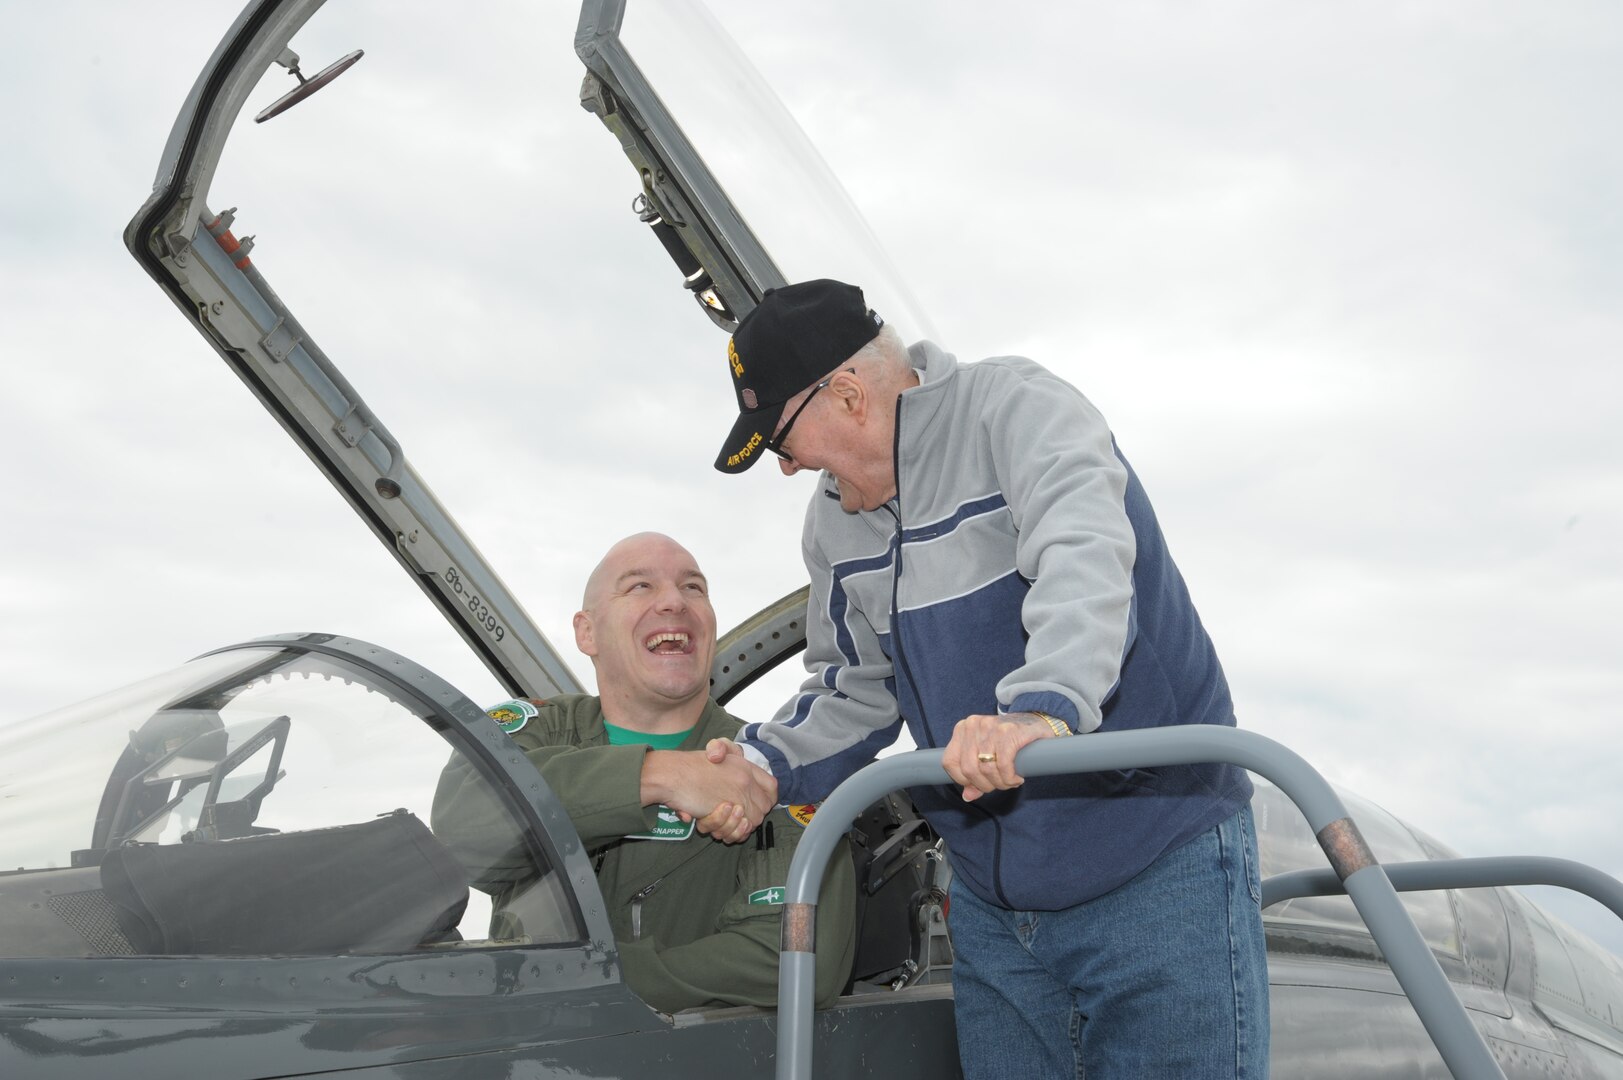 Maj. Vince Sherer, 560th Flying Training Squadron, student instructor, greets Chaplain Lt. Col. Ret. Kenyon Hutchenson, during the Joint Base San Antonio Seguin Auxiliary Airfield Open House, Nov. 13, 2015. JBSA-Randolph Auxiliary Airfield is used solely by the 560th Flying Training Squadron for preparing instructors for undergraduate pilot training T-38 training assignments.  The 560th primarily uses Seguin Auxfield for practice landings in a pilot controlled pattern called instead of FAA controllers. (U.S. Air Force photo by Joel Martinez/Released) 